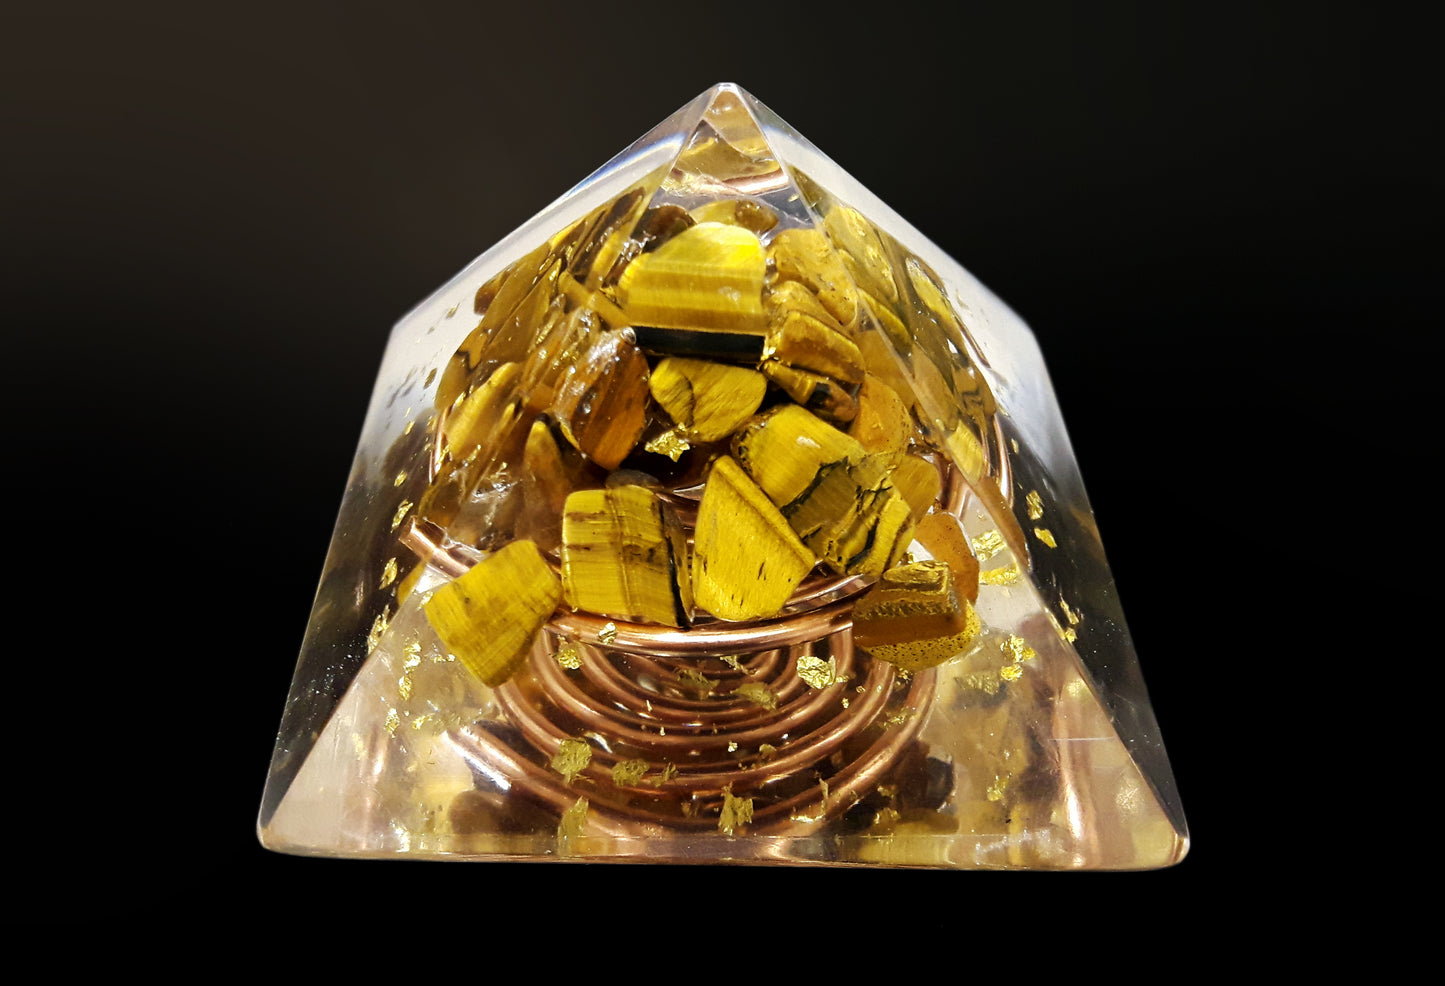 Tiger's eye orgonite Pyramid - protection, wealth, money, success, power